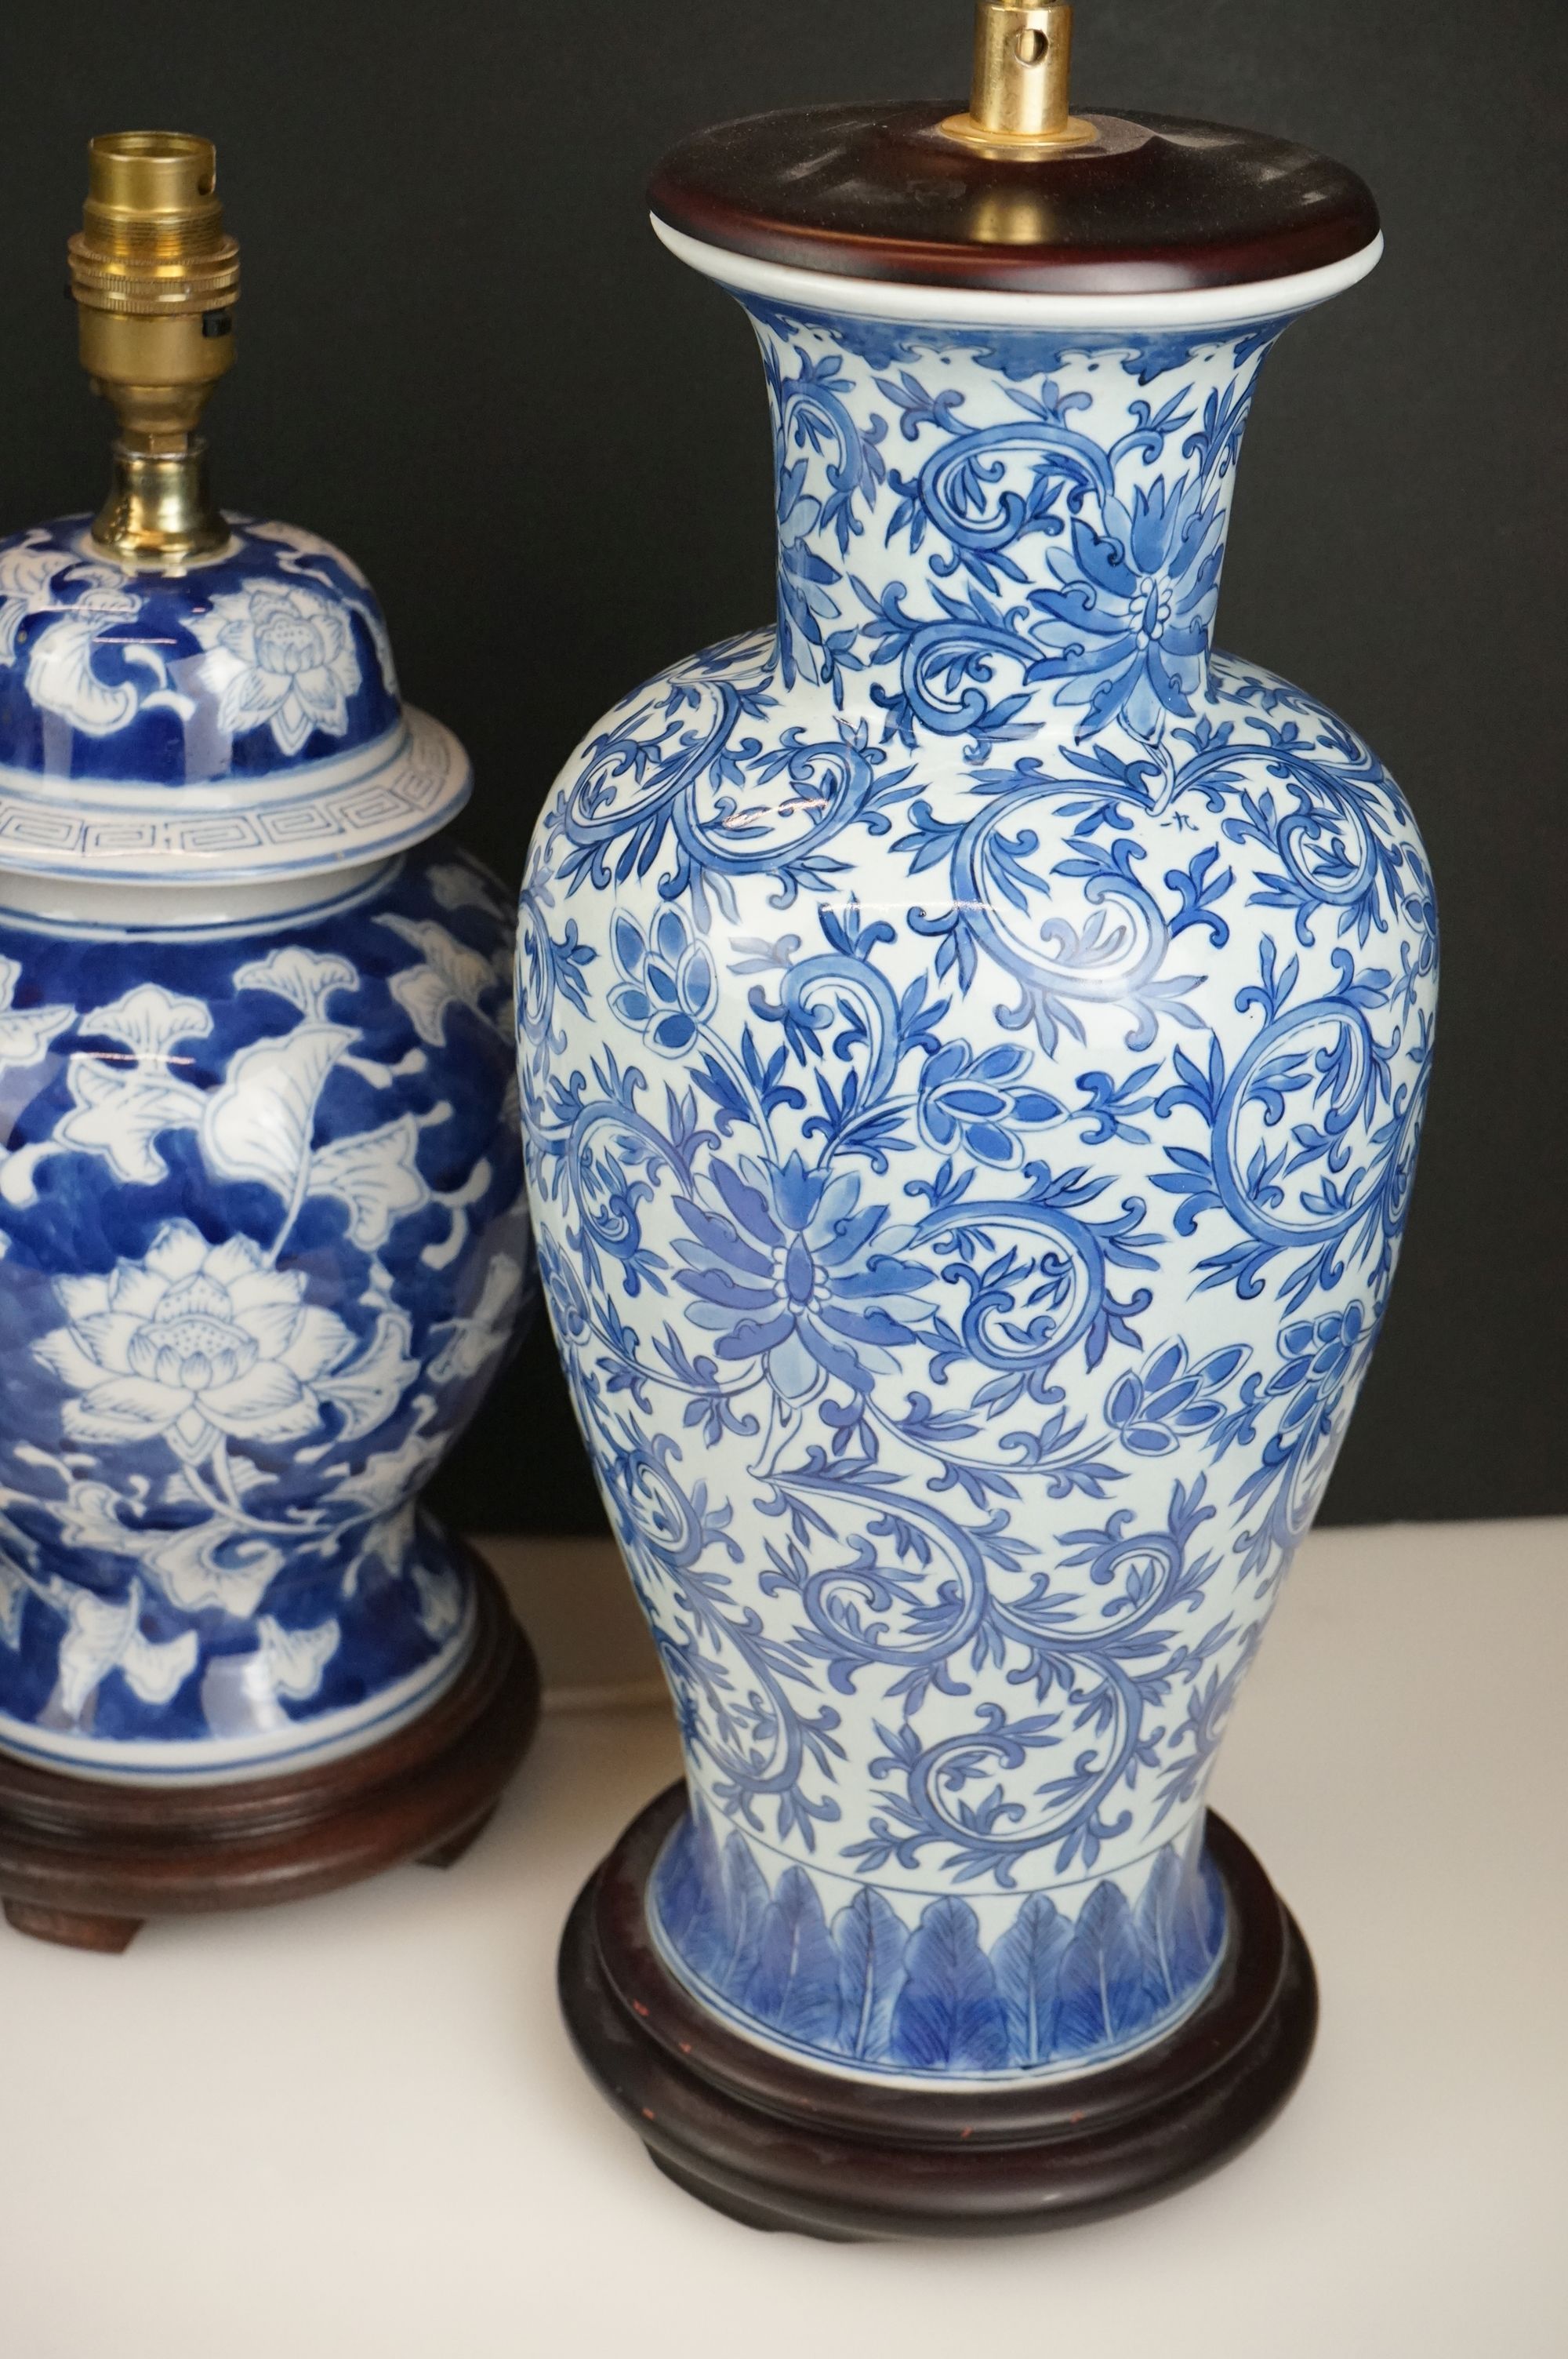 Pair of Blue and White Ceramic Table Lamps in the form of Lidded Ginger Jars on Wooden Stands, - Image 3 of 4